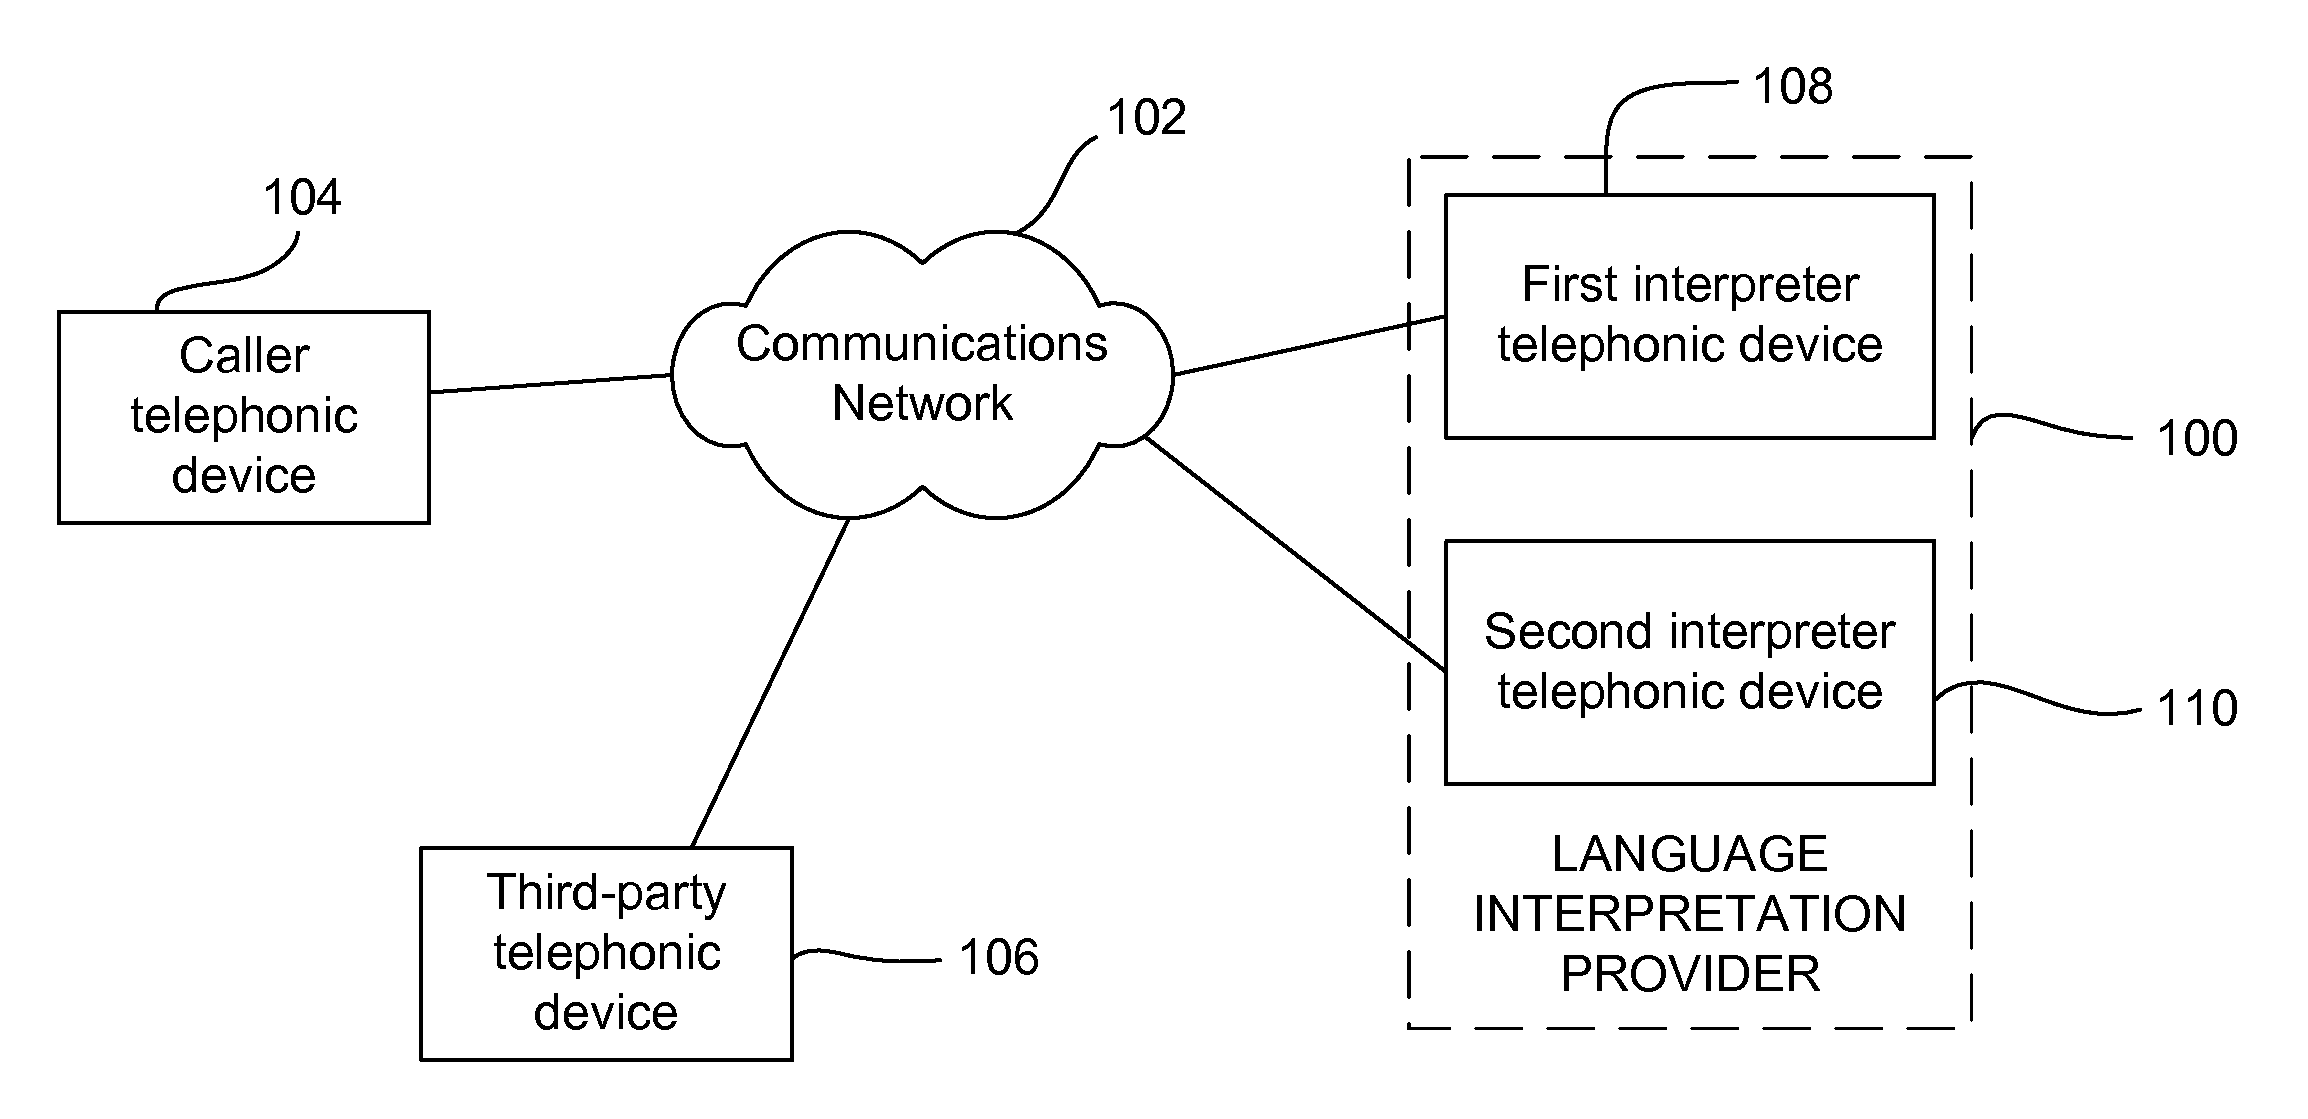 Systems and methods for providing relayed language interpretation